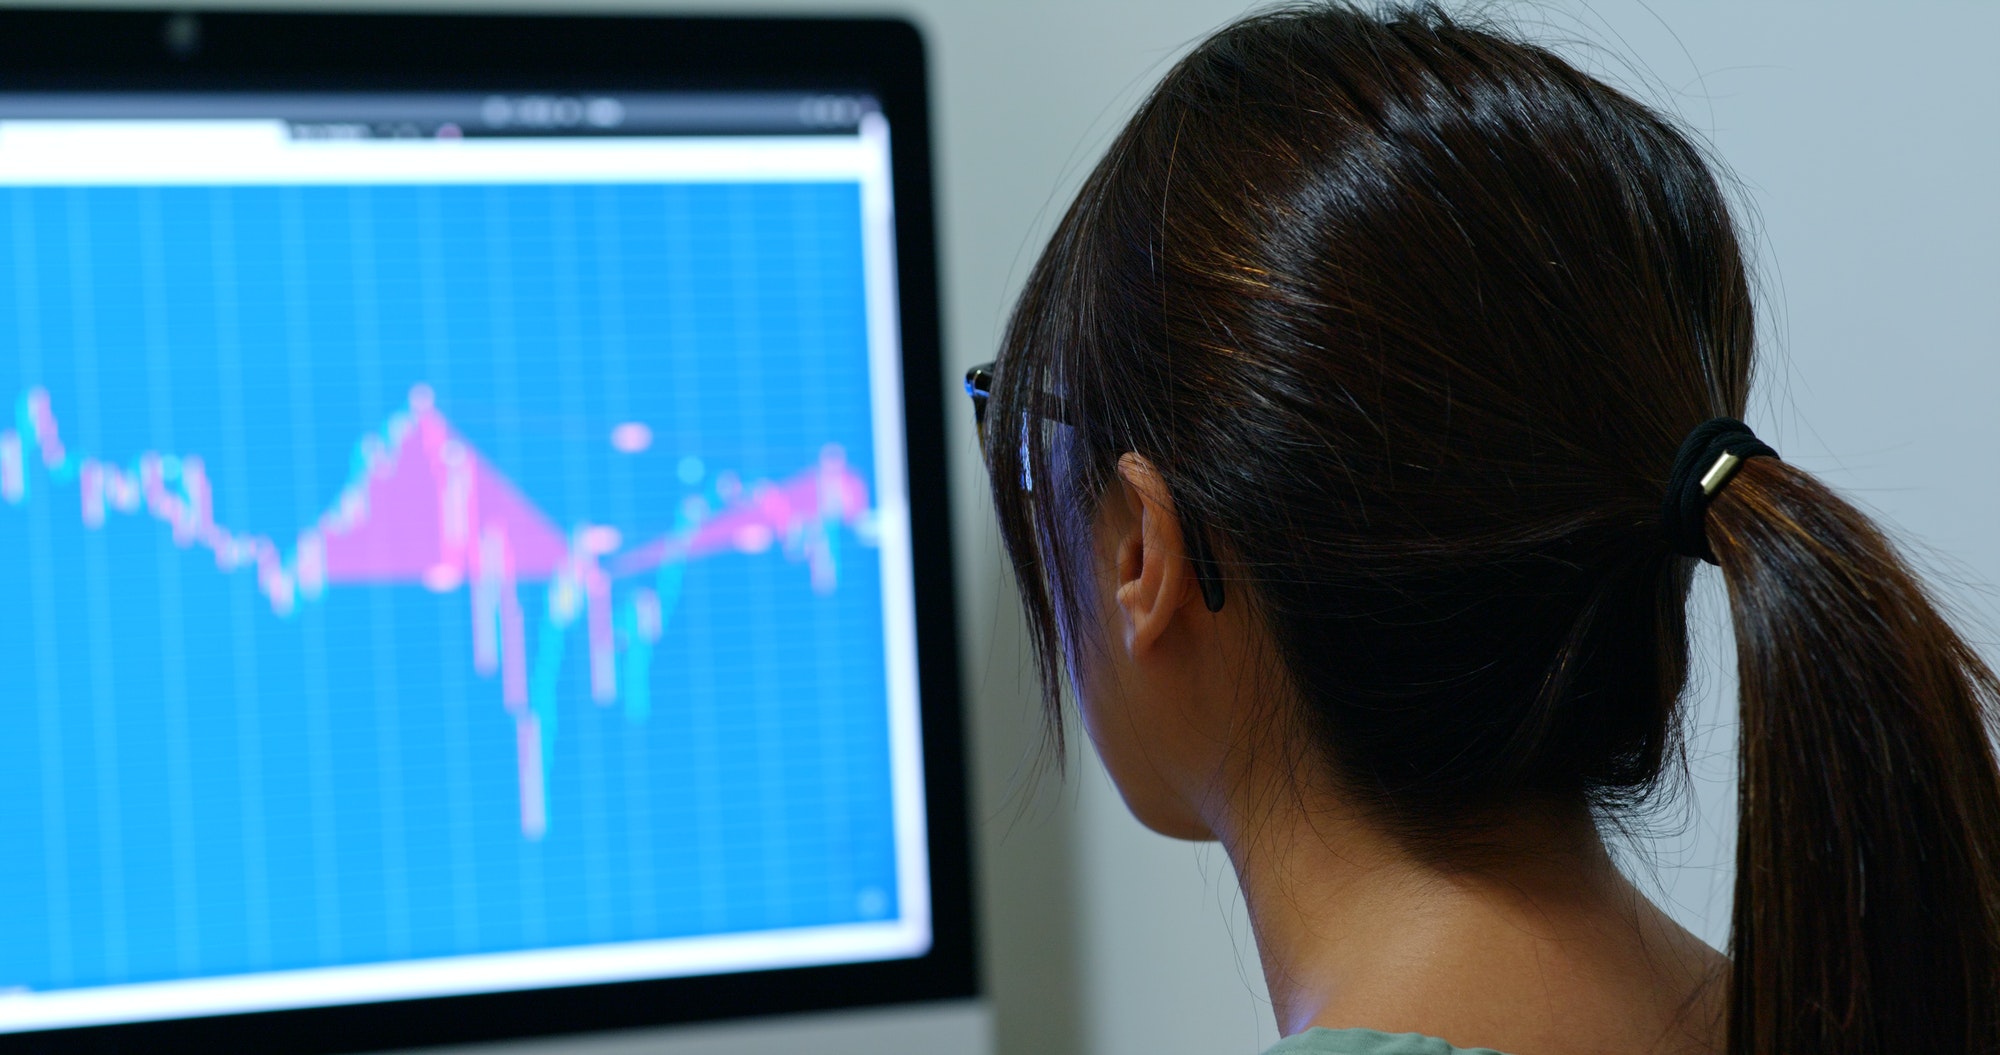 Woman look at computer screen with stock market data graph